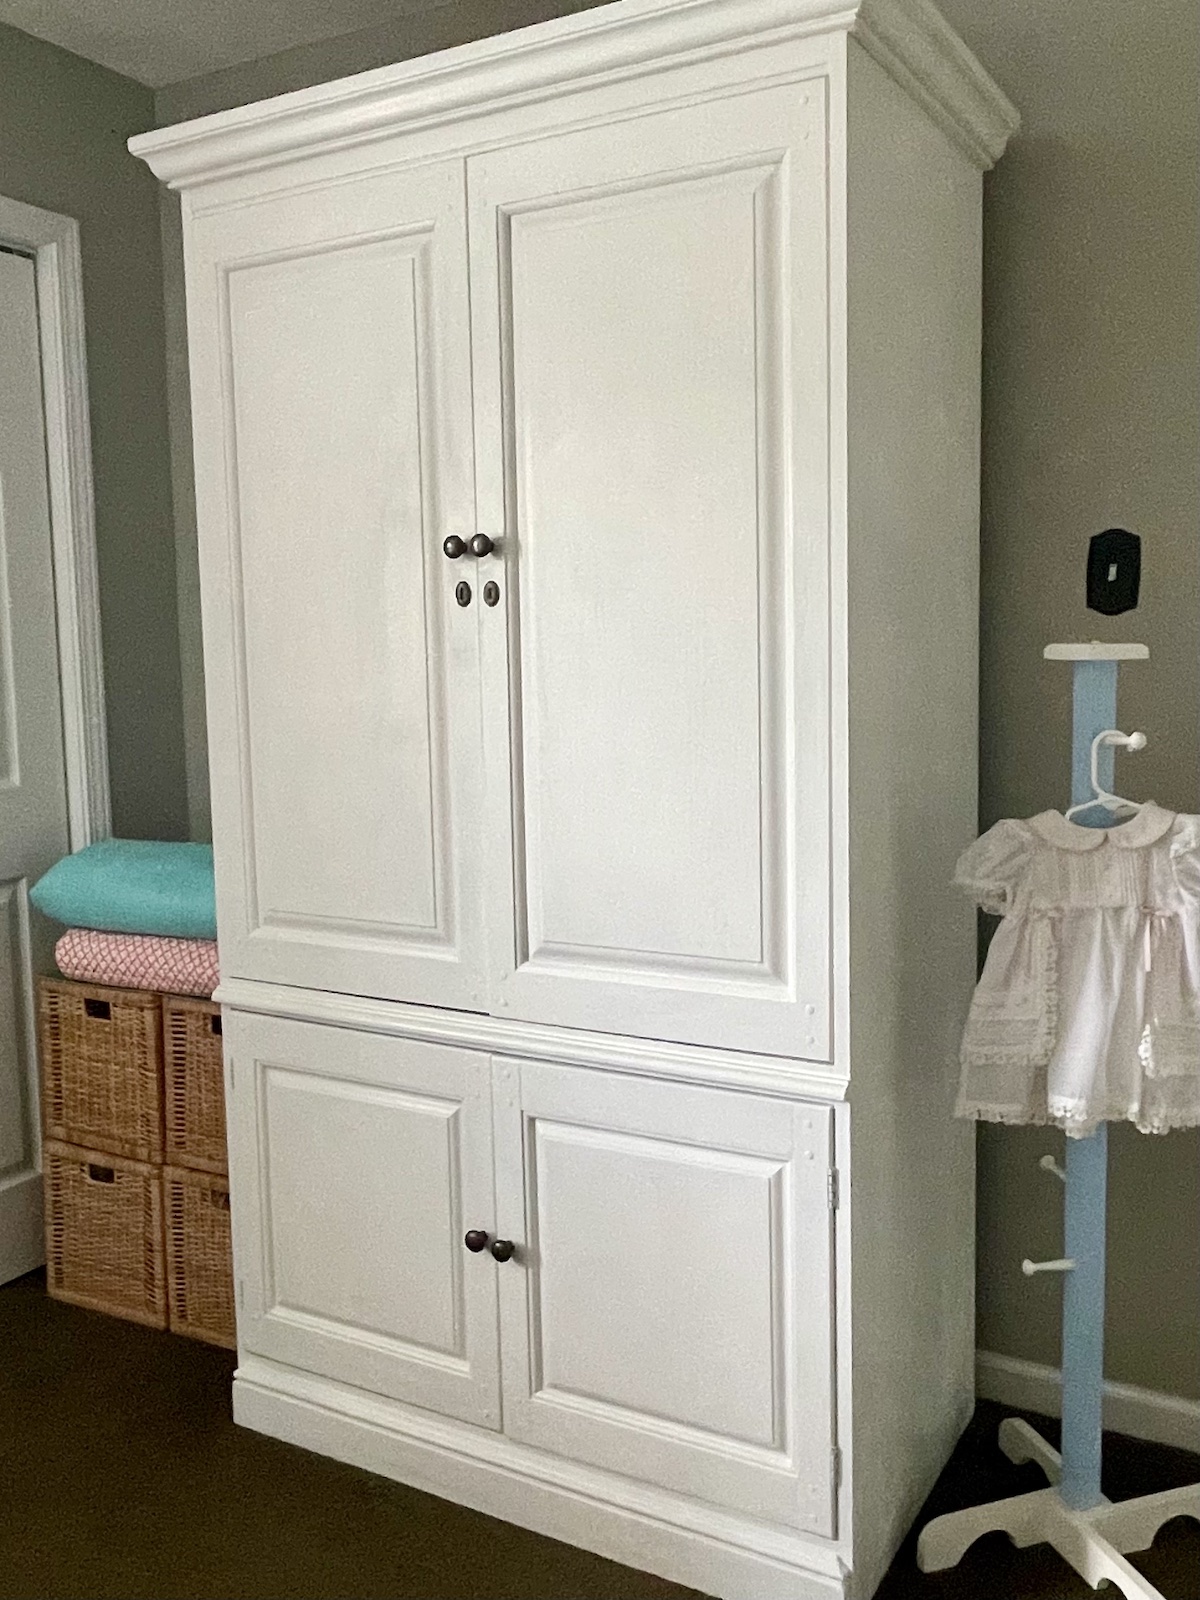 Sewing Space Tutorial: Upcycled TV Cabinet